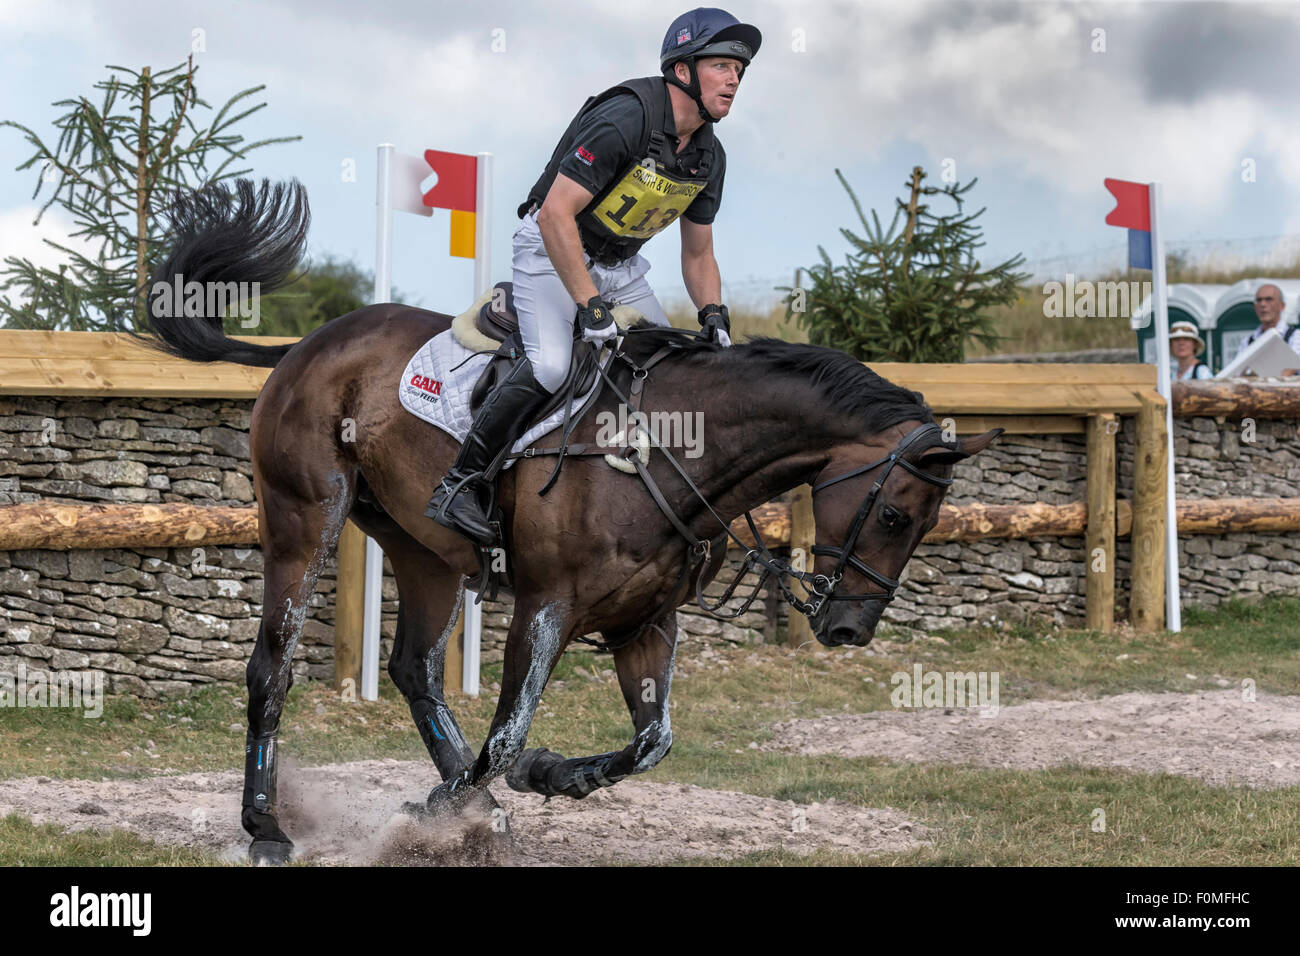 FBE Gatcombe 2015 - Oliver Townend riding Note Worthy - Intermédiaire britannique gagnant Banque D'Images